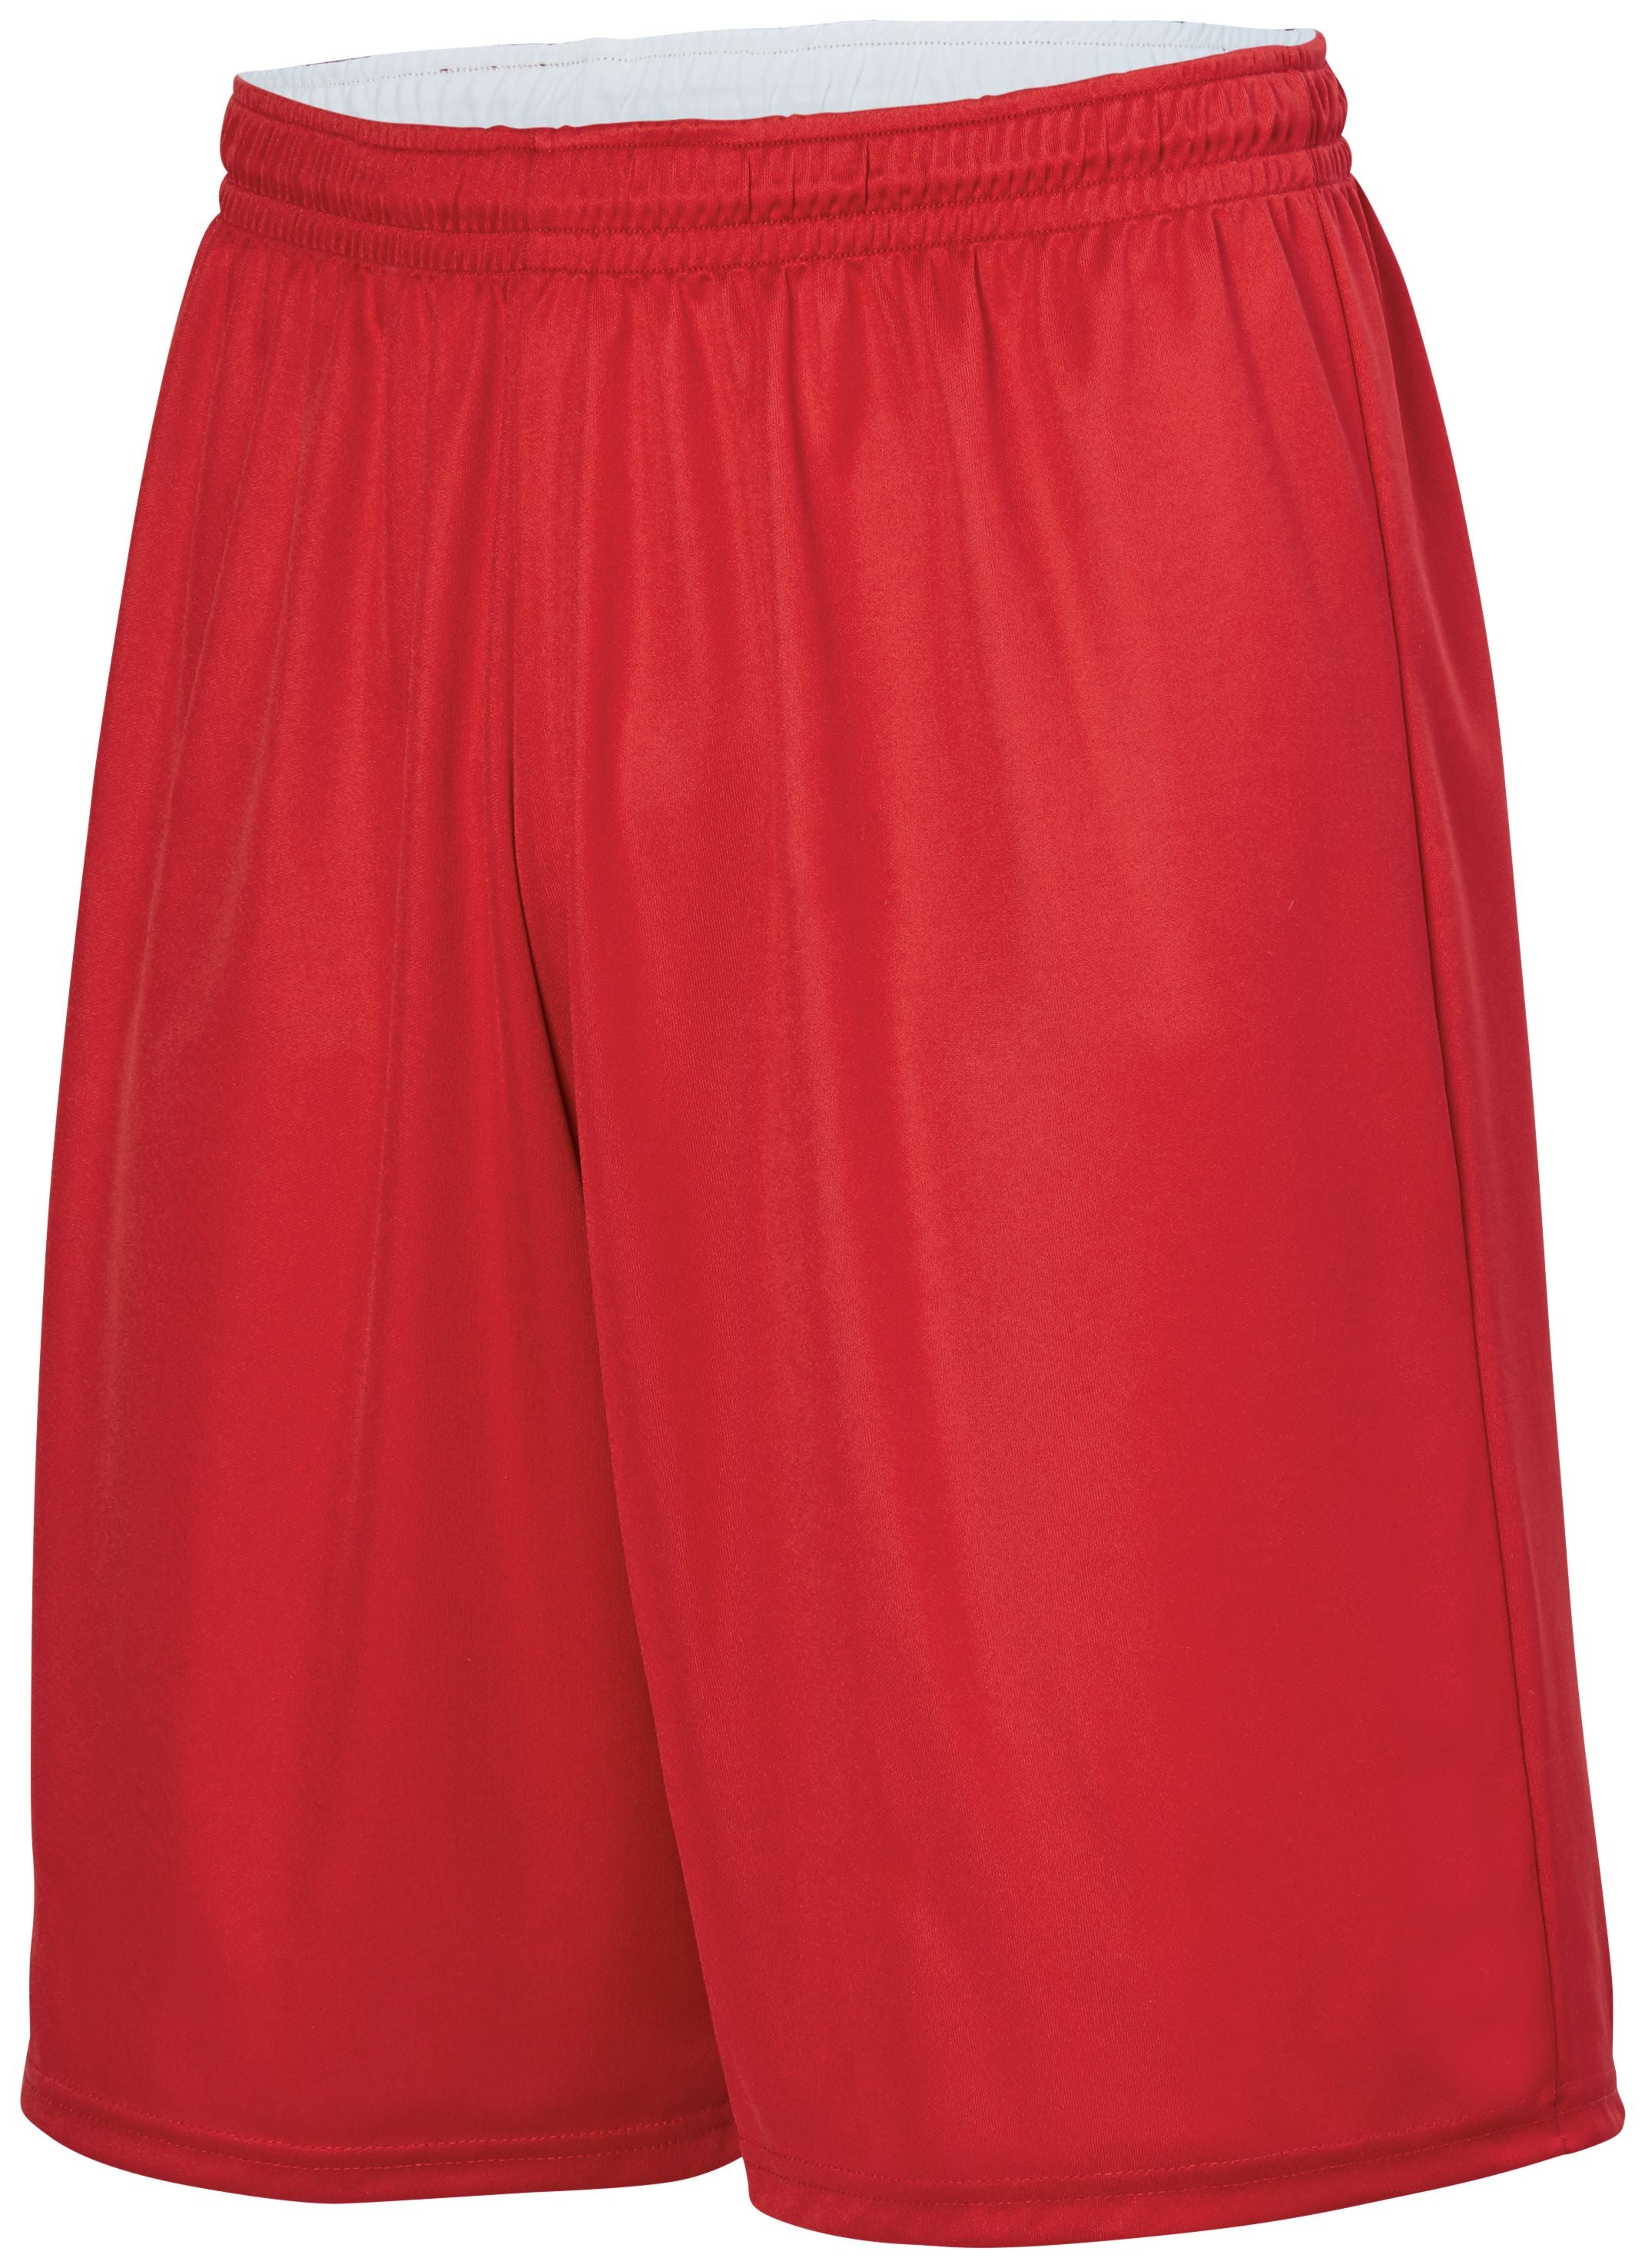 Augusta Sportswear Reversible Wicking Shorts in Red/White  -Part of the Adult, Adult-Shorts, Augusta-Products, Basketball, All-Sports, All-Sports-1 product lines at KanaleyCreations.com